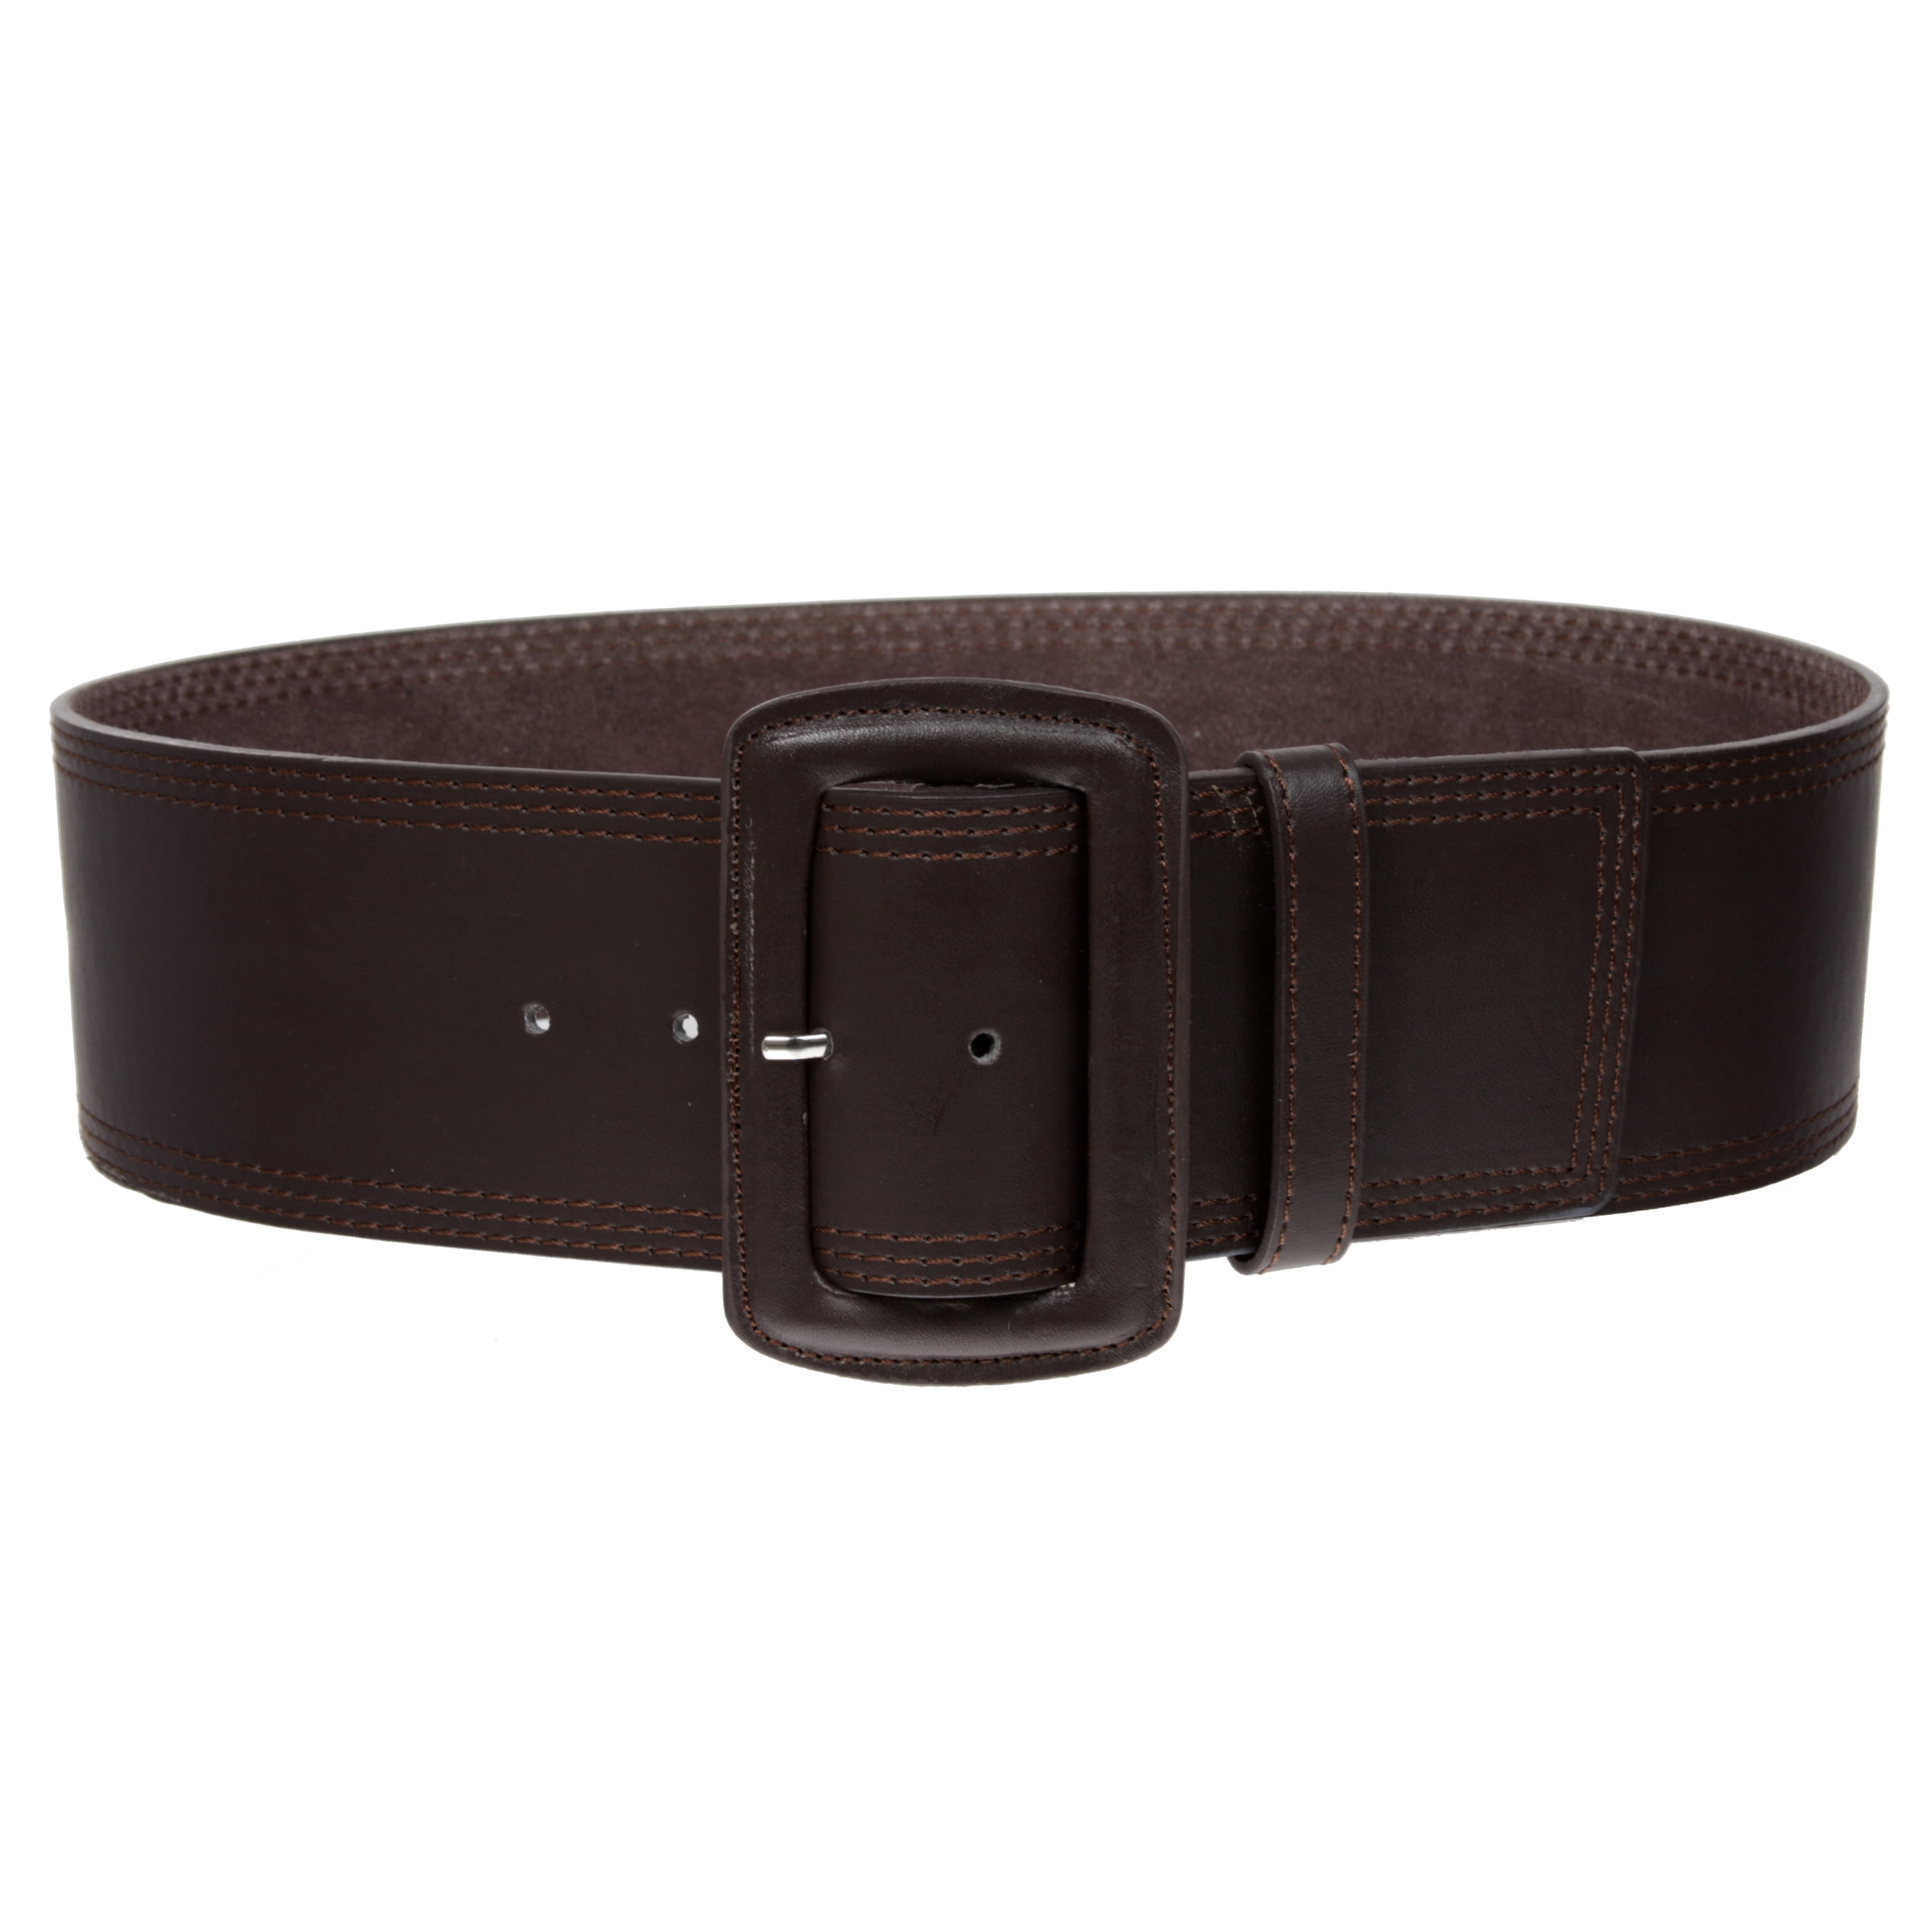 2 (50 mm) Genuine Leather Braided Woven Belt, Black  S/M at   Women's Clothing store: Apparel Belts